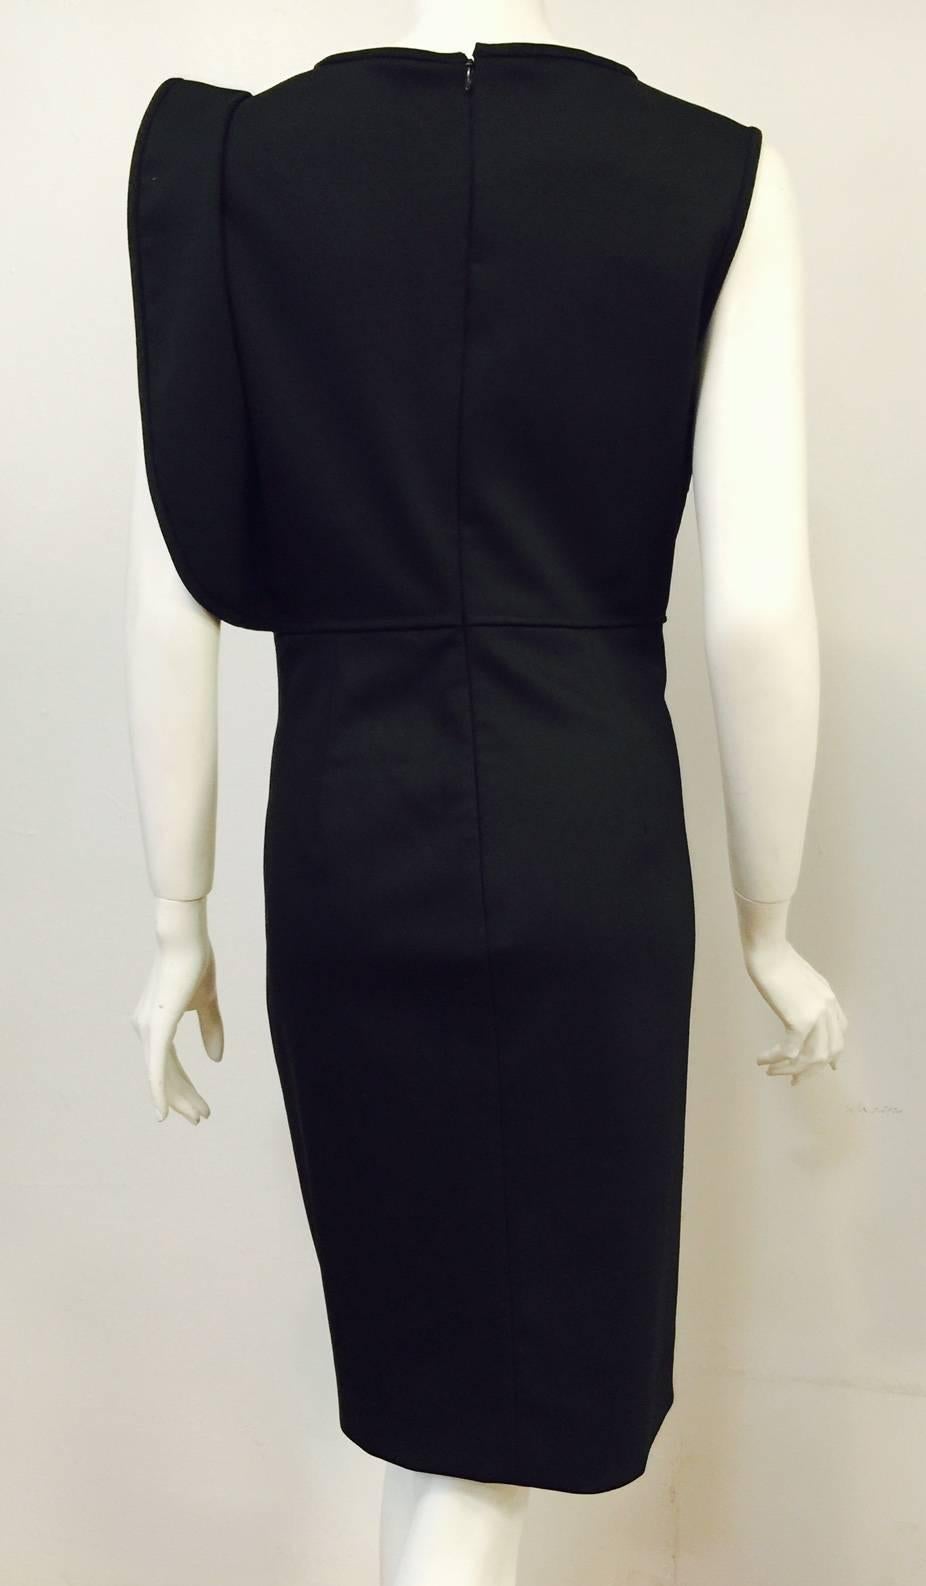 Valentino Technocouture Black Sheath With Ruffle Cap Sleeve In Excellent Condition For Sale In Palm Beach, FL